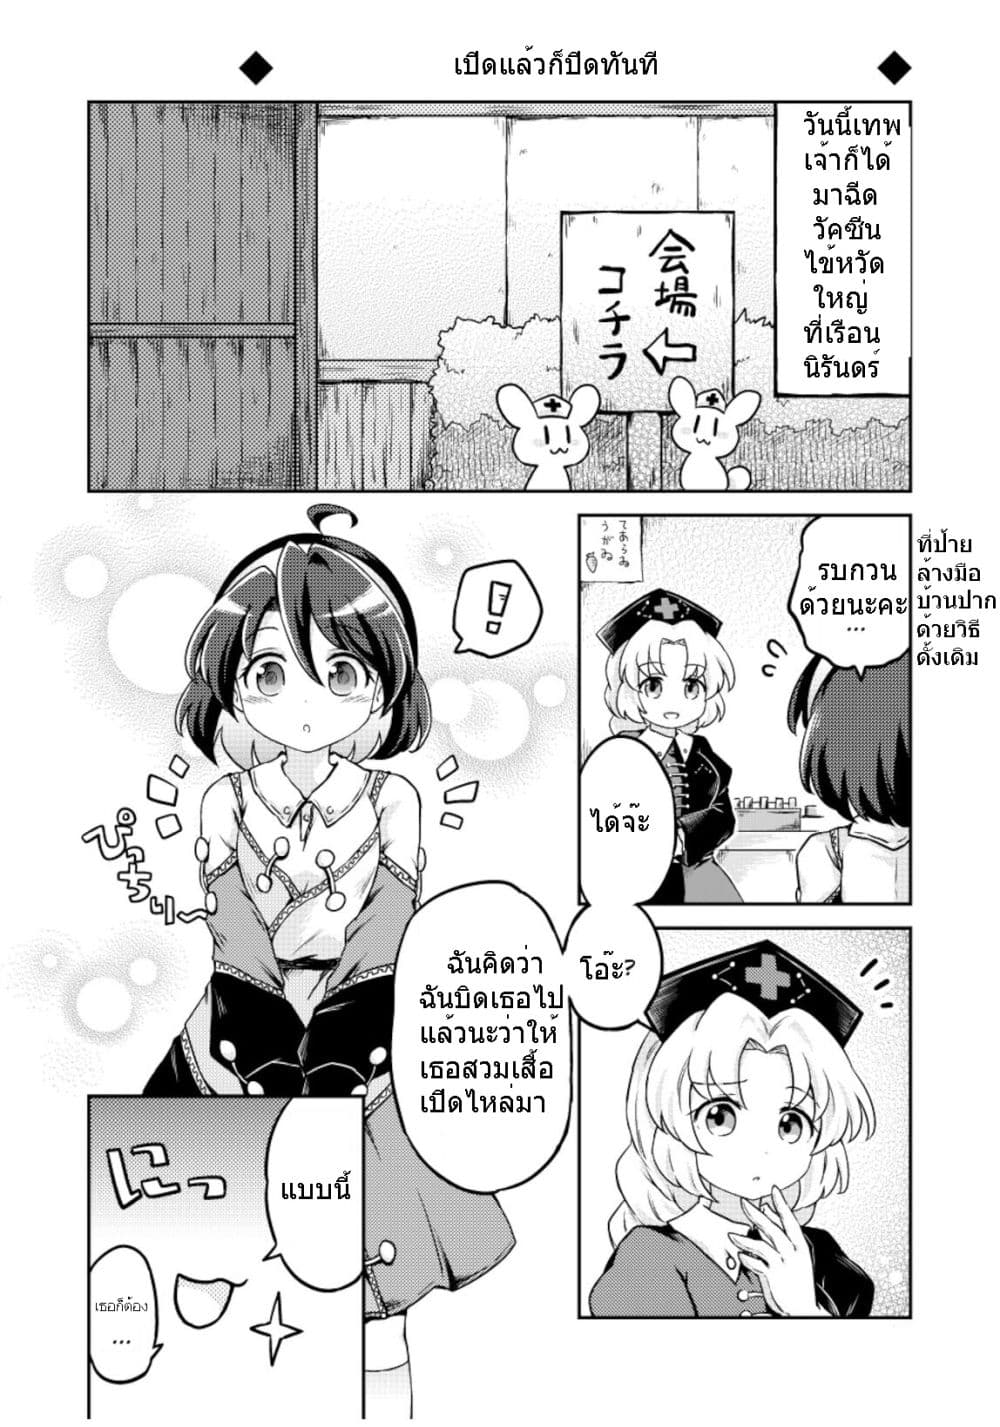 Touhou Project Chima Book By Pote ตอนที่ 2 (14)